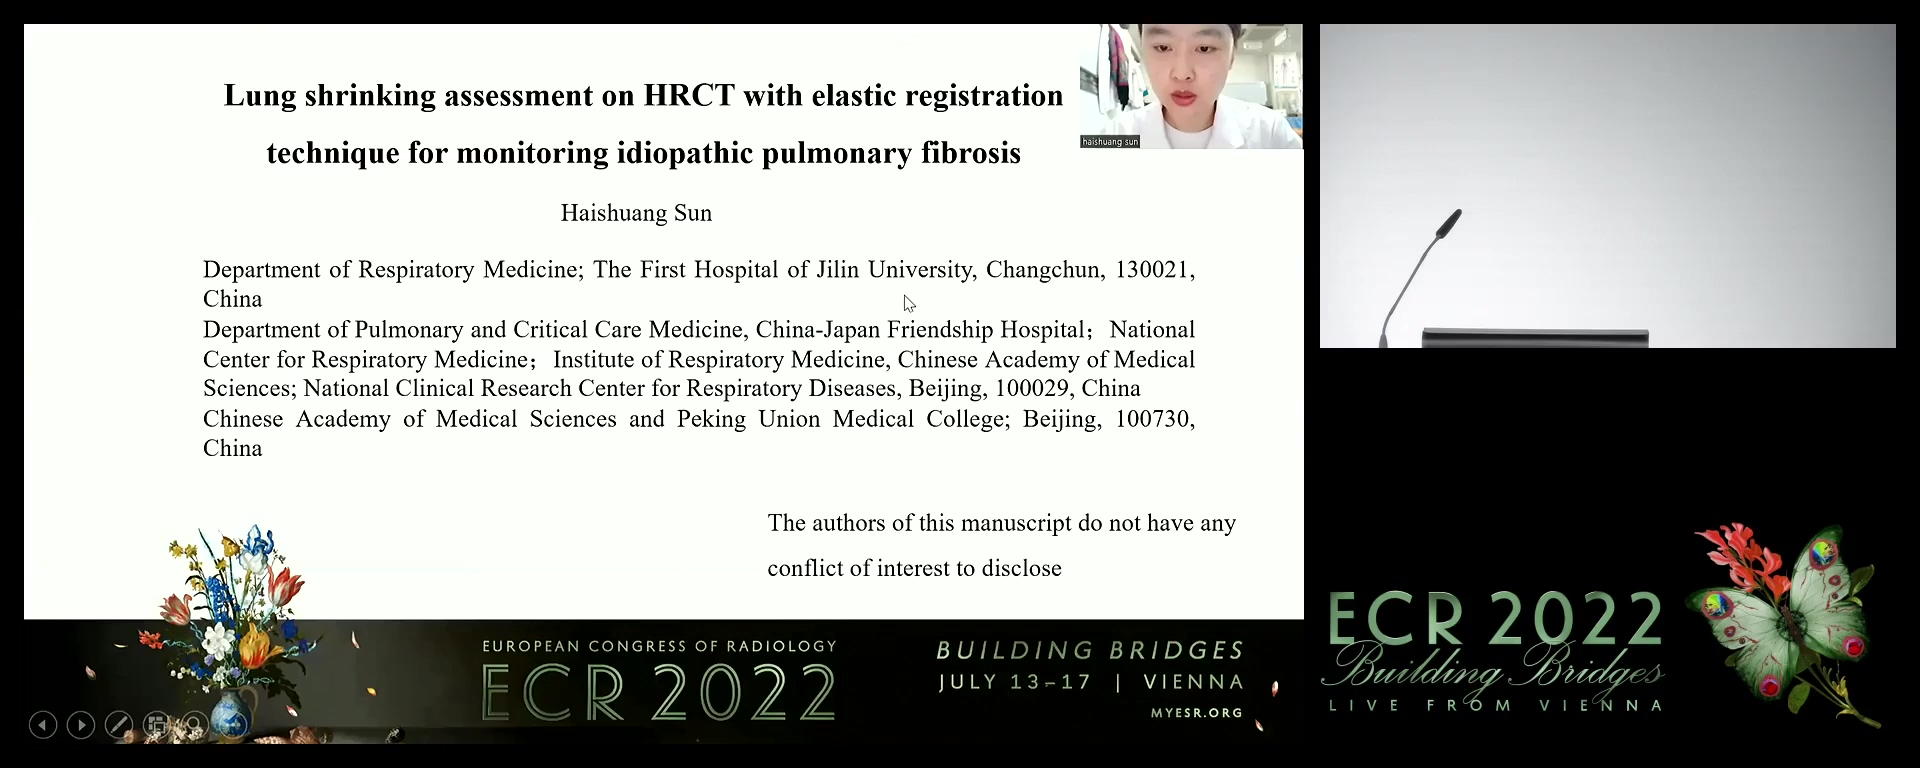 Lung CT-based elastic registration technique in longitudinal evaluation of idiopathic pulmonary fibrosis - Haishuang Sun, Changchun / CN